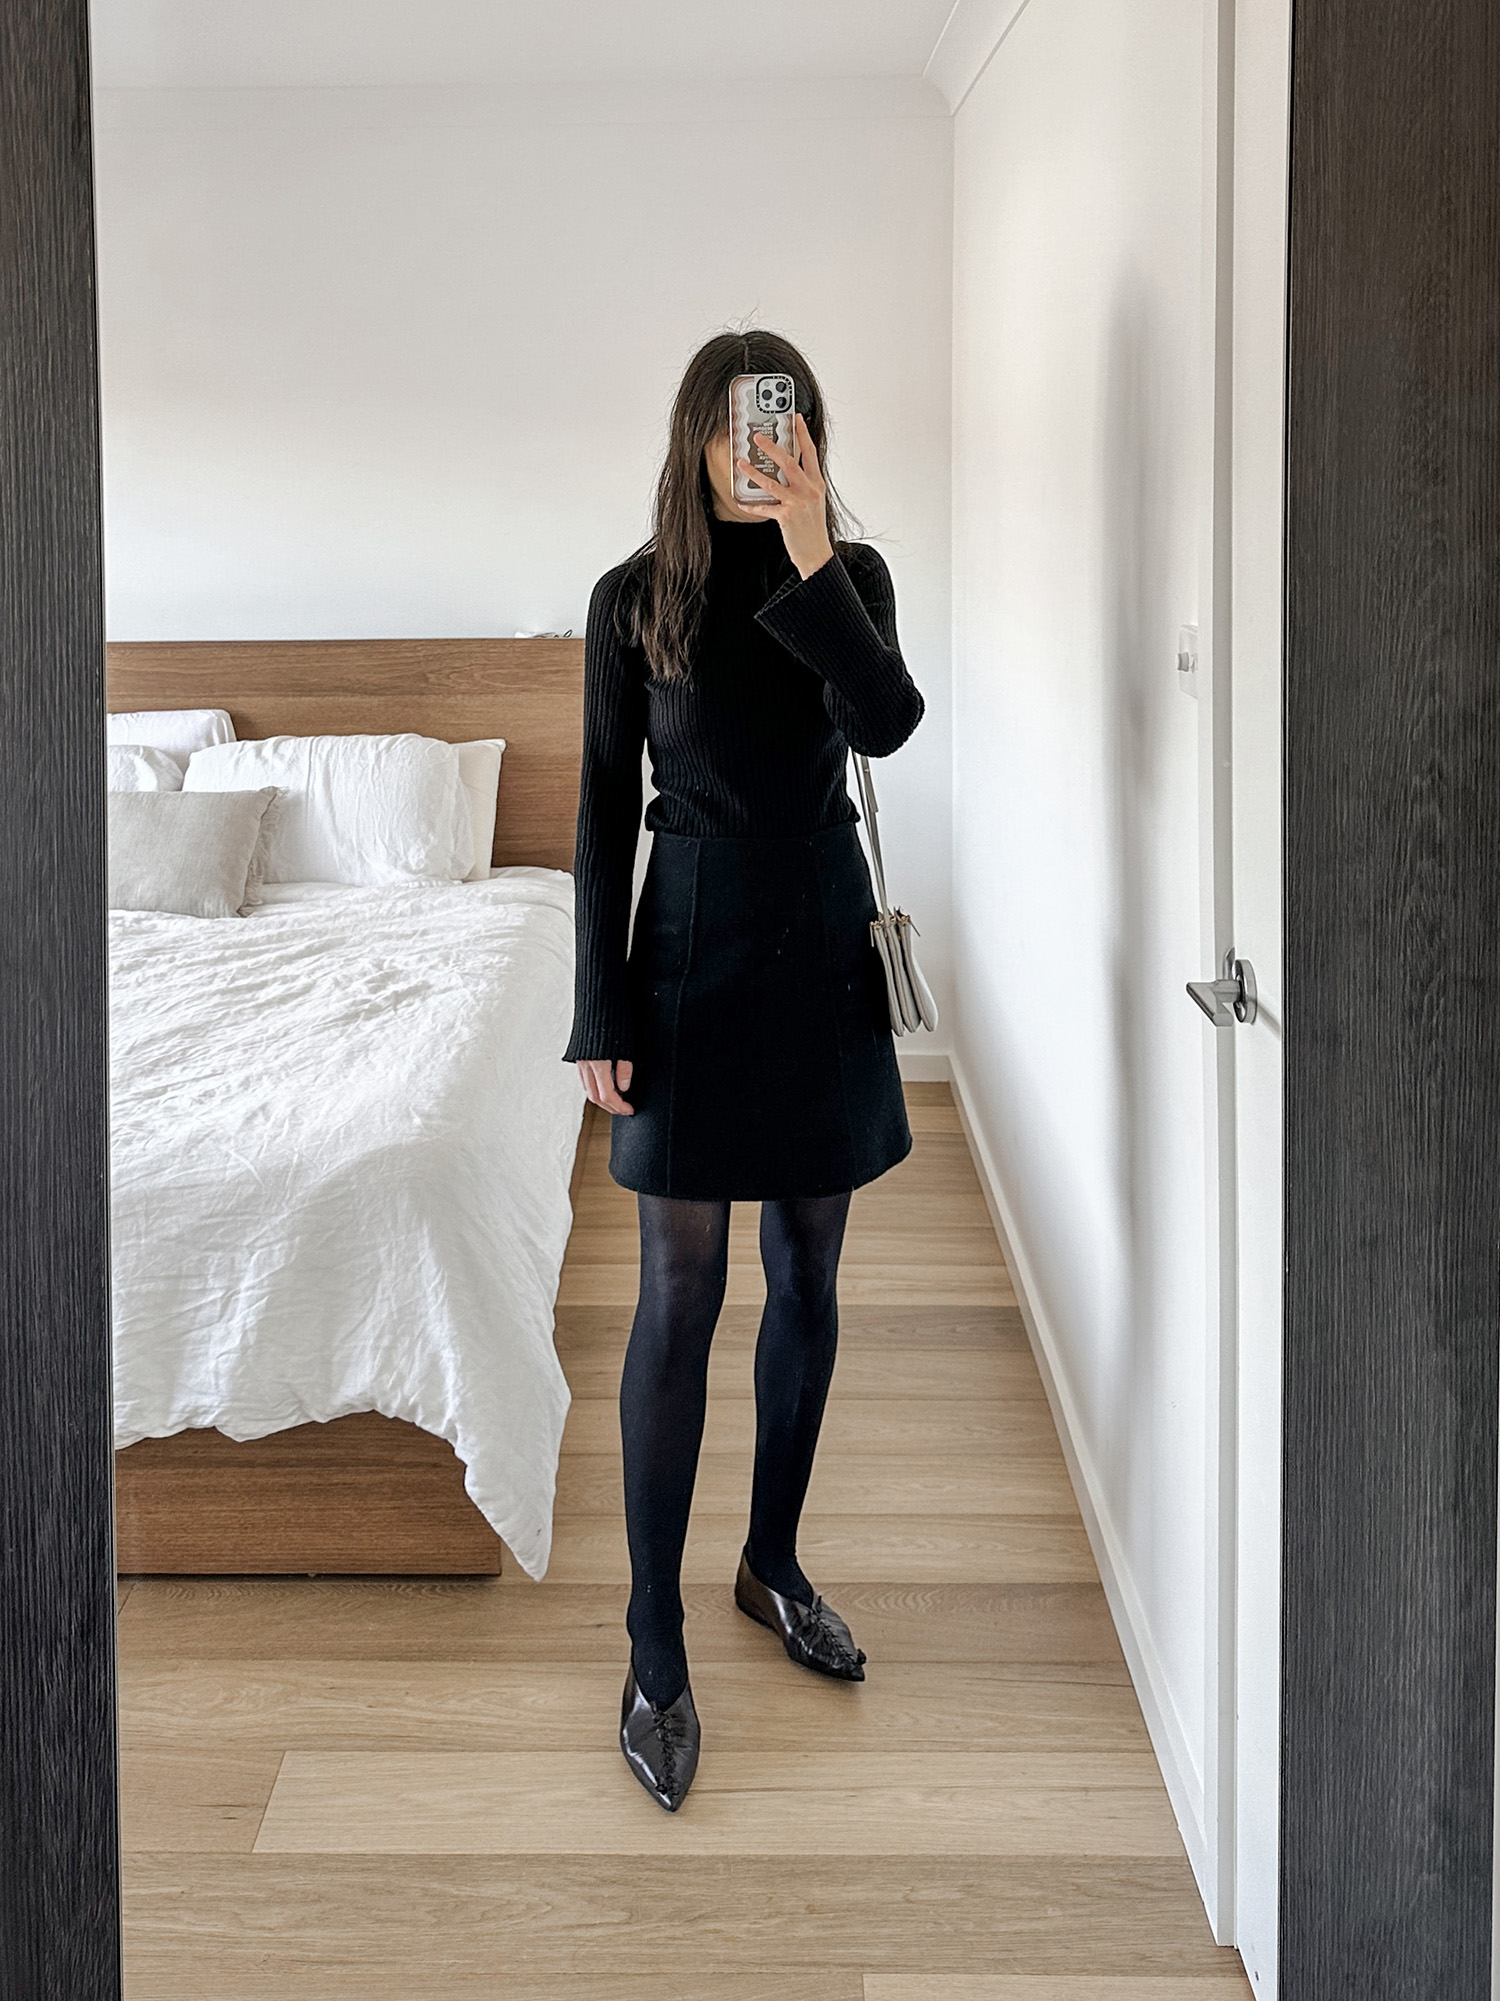 Blazer Style: Leggings + Gucci Boots  Chic winter outfits, Trendy fall  outfits, Black fashion bloggers